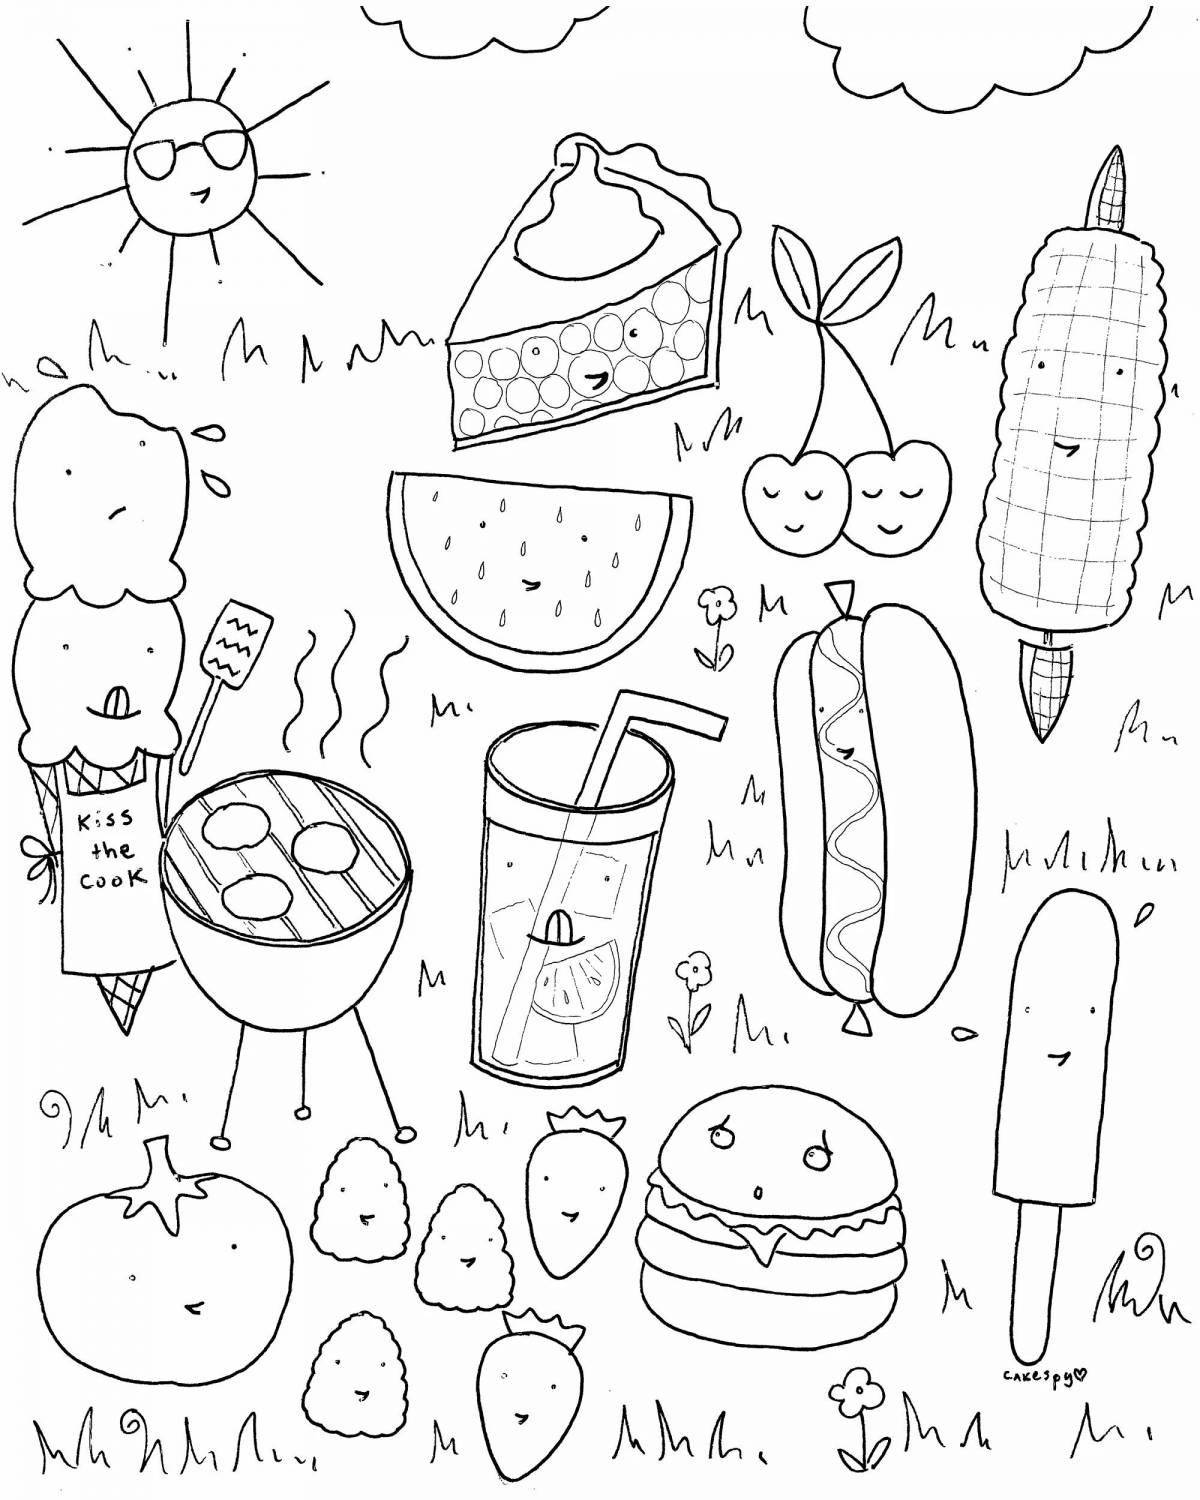 Fun coloring book for 10 year old girls cute food